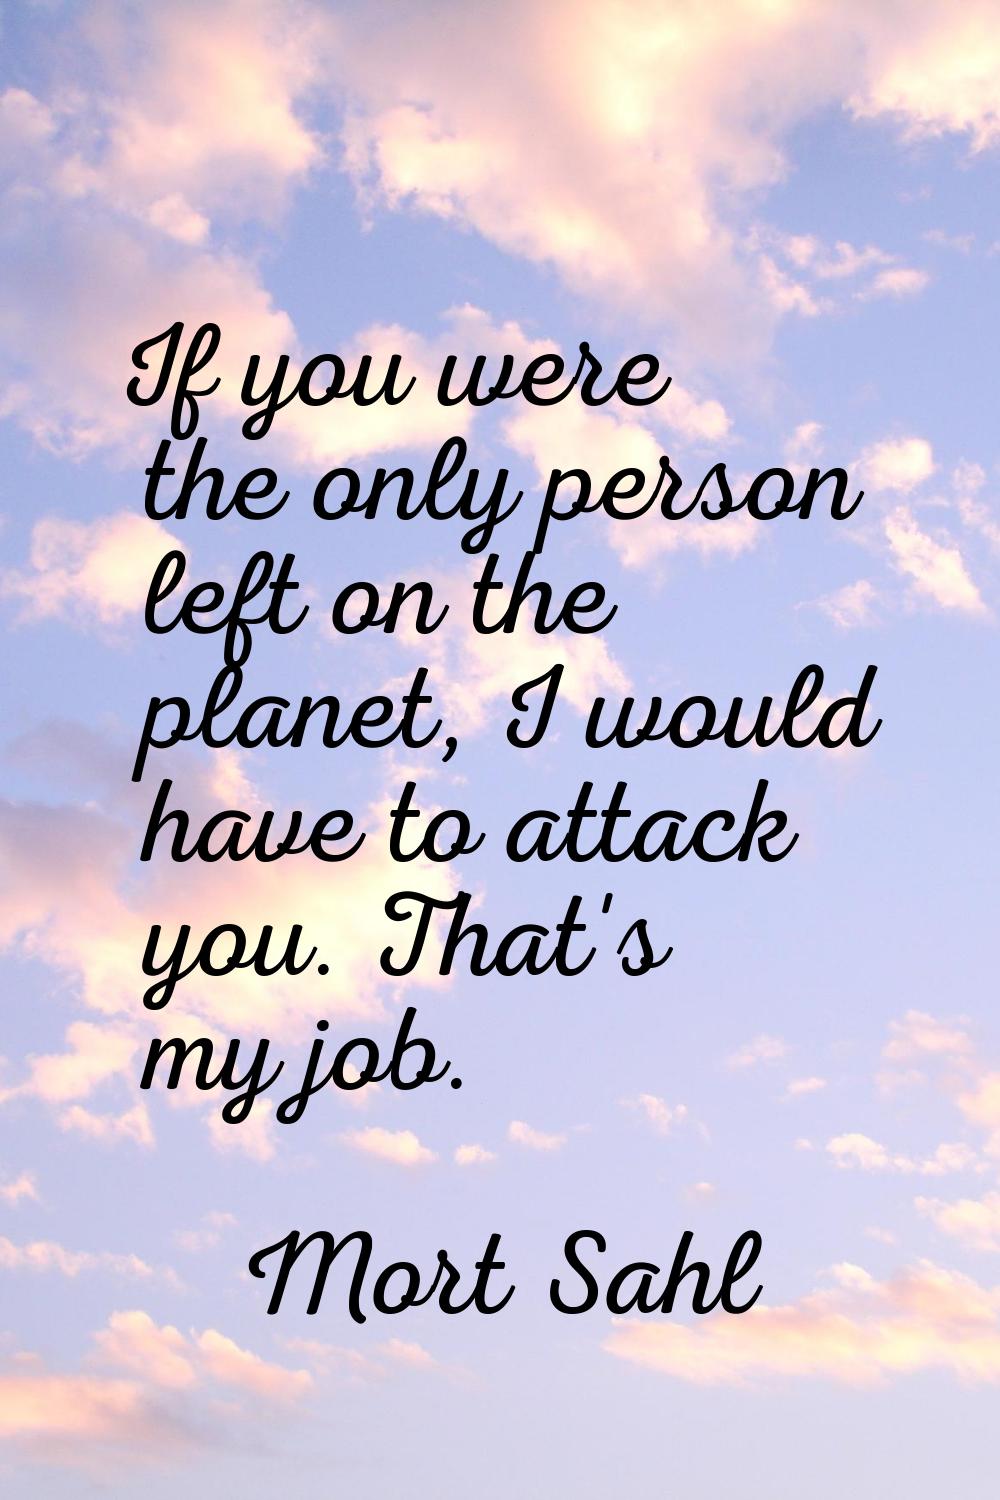 If you were the only person left on the planet, I would have to attack you. That's my job.